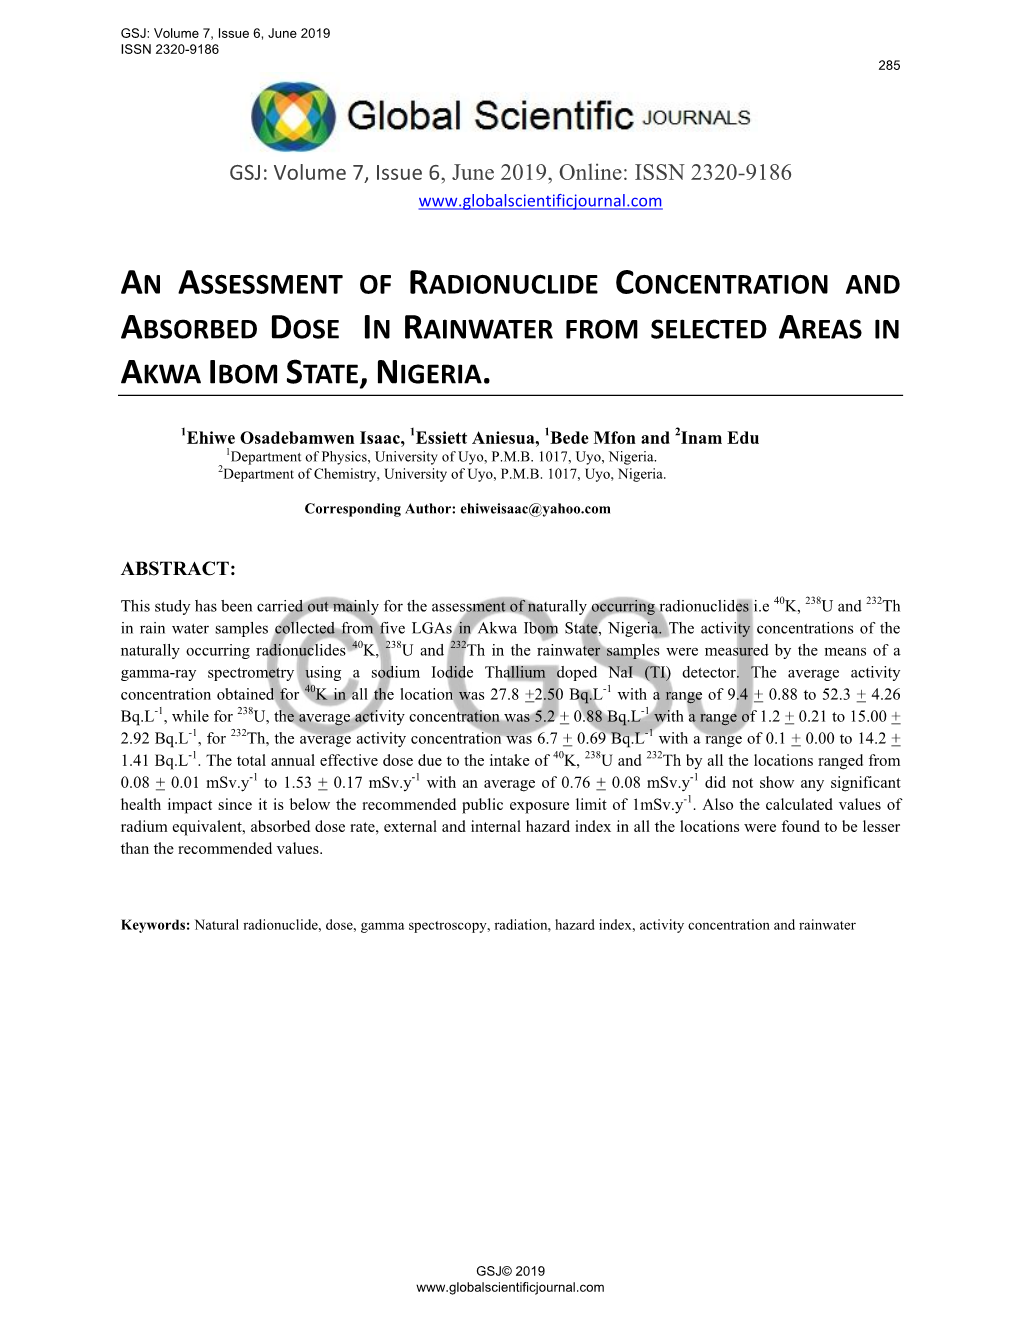 An Assessment of Radionuclide Concentration and Absorbed Dose in Rainwater from Selected Areas in Akwa Ibom State, Nigeria